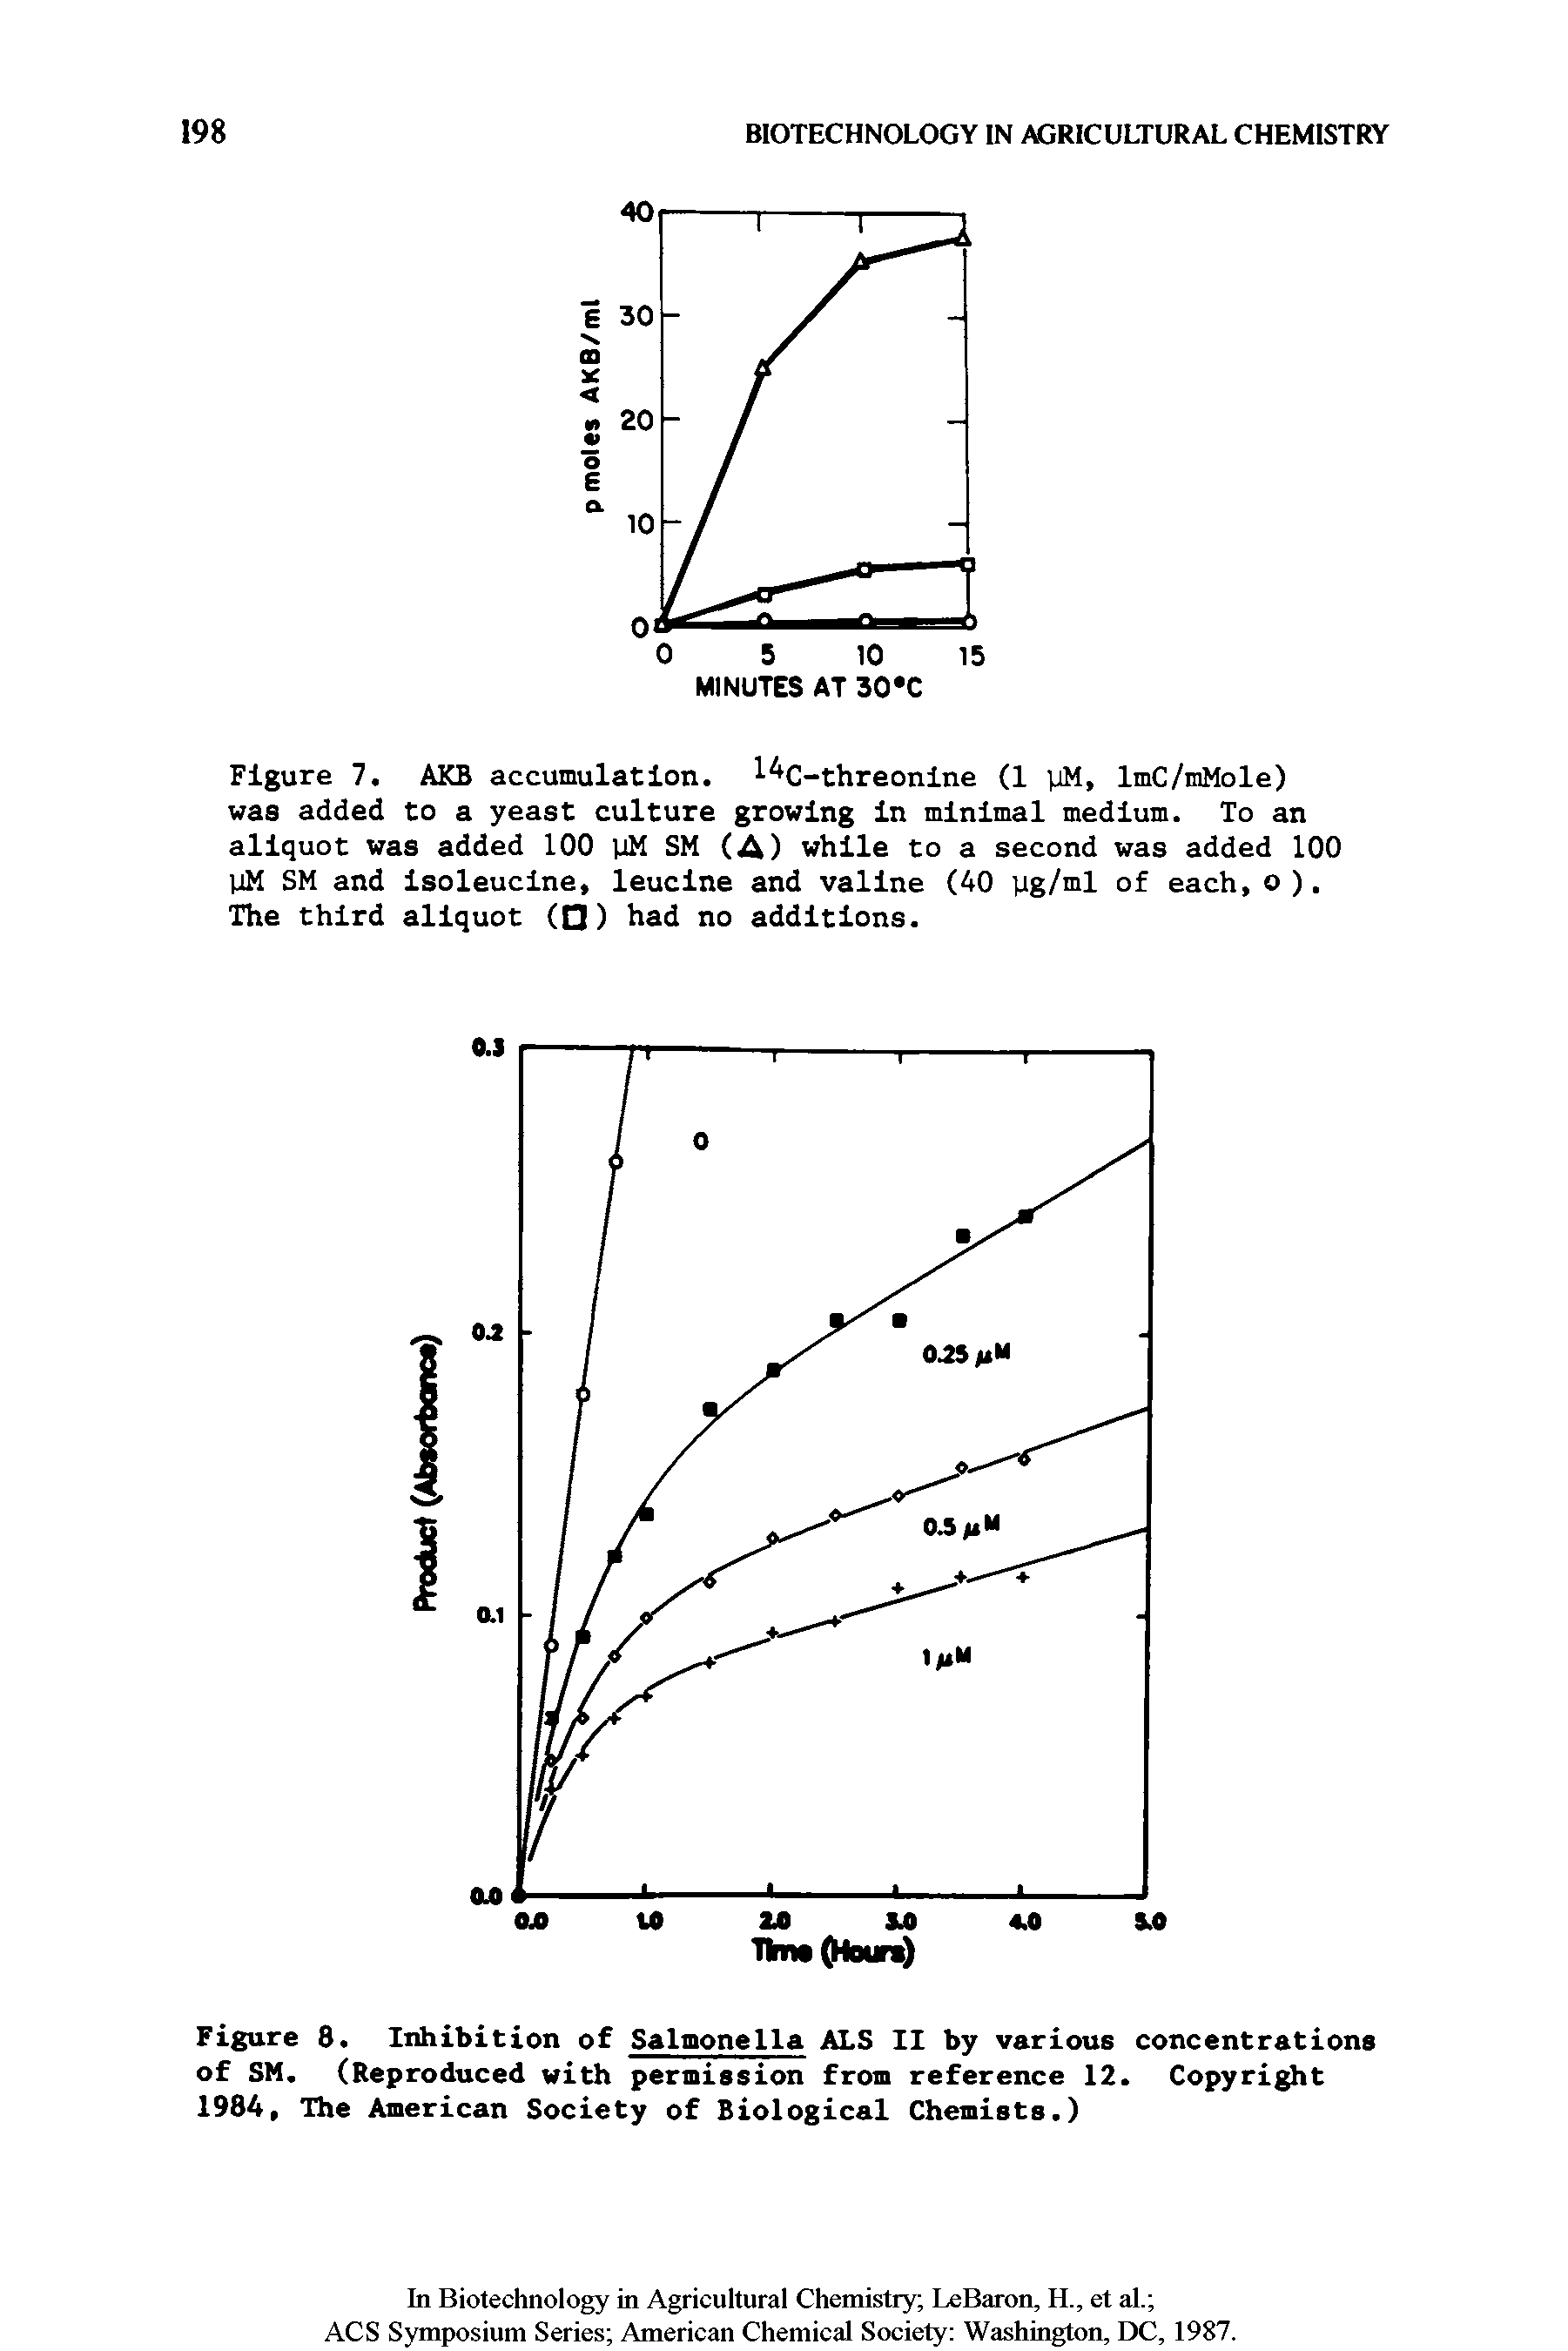 Figure 8. Inhibition of Salmonella ALS II by various concentrations of SM. (Reproduced with permission from reference 12. Copyright 1984, The American Society of Biological Chemists.)...